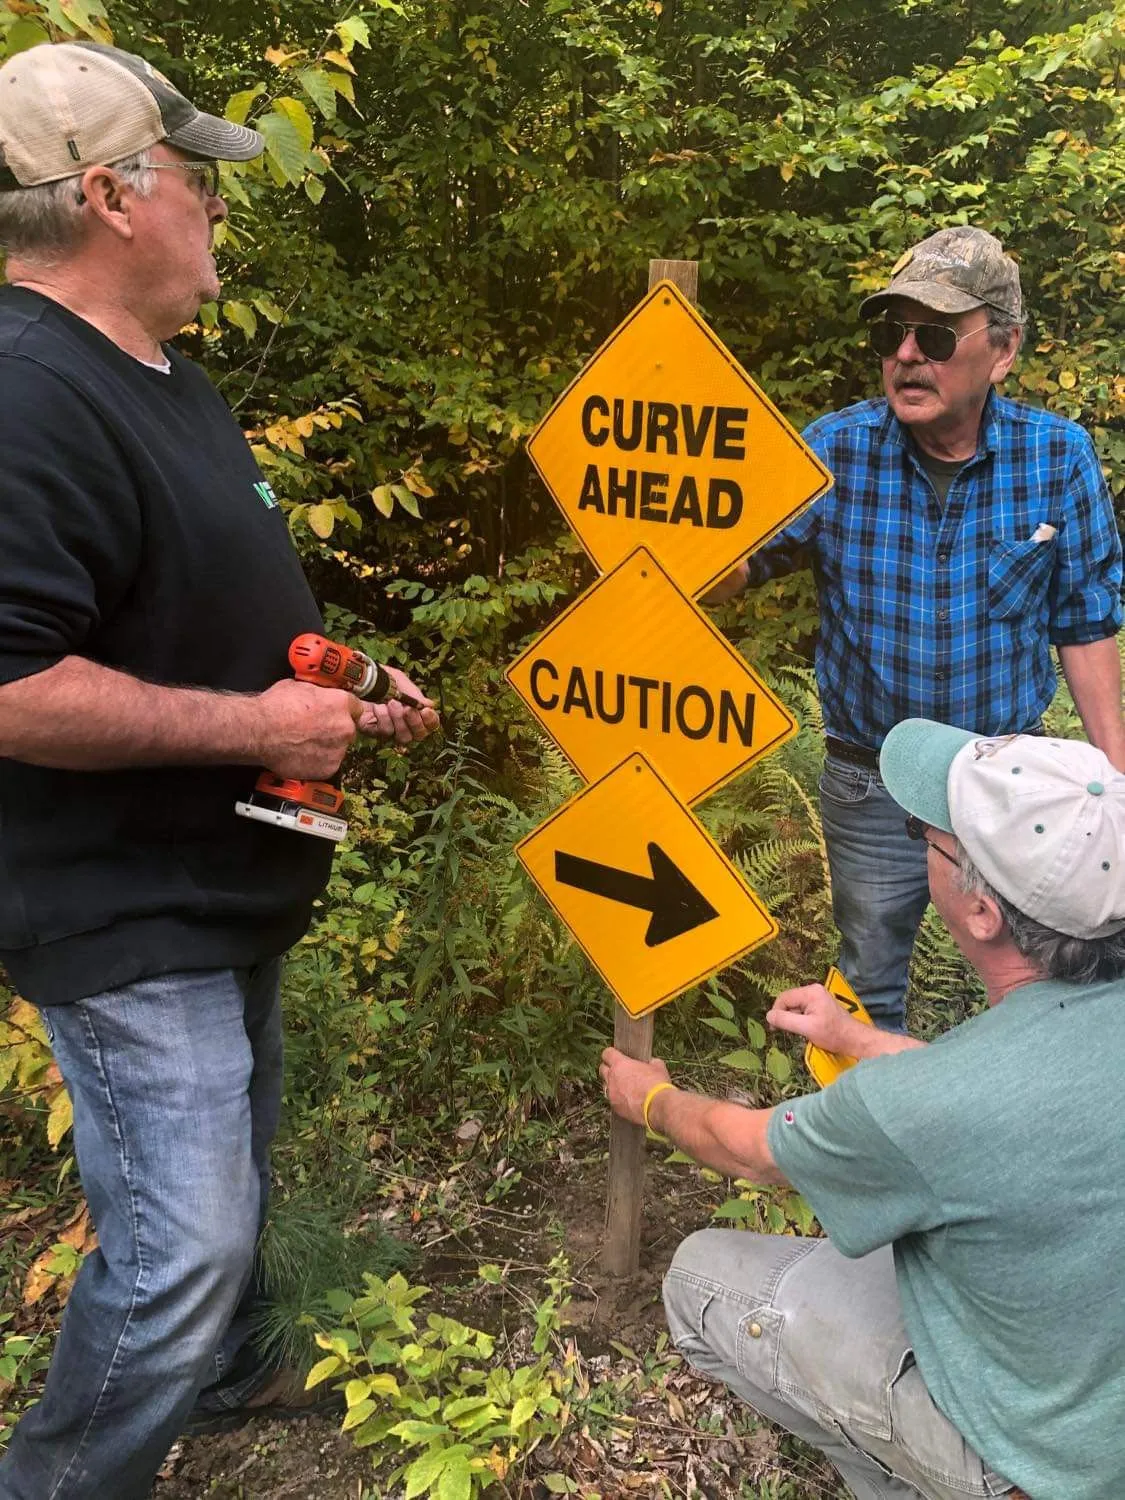 Three men are holding a sign that says " curve ahead caution ".